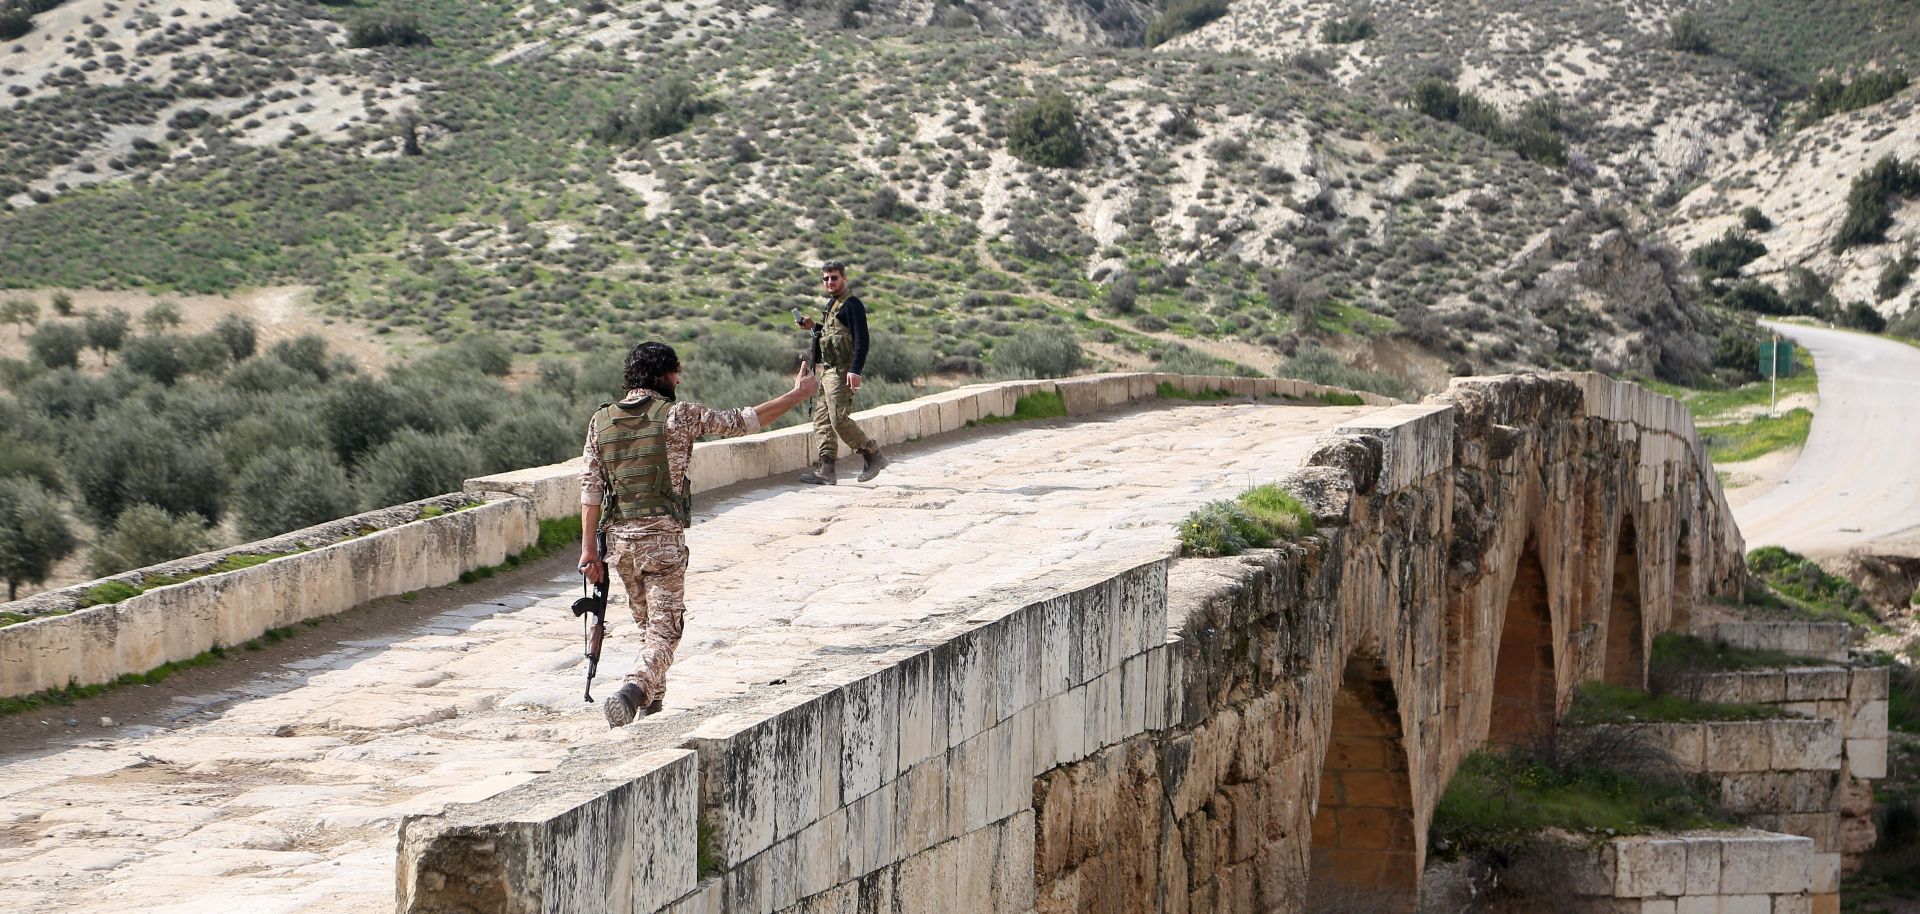 Turkish-backed Syrian opposition fighters walk on the Roman bridge in the archaeological site of Cyrrhus, northeast of the Syrian city of Afrin, in February 2018.